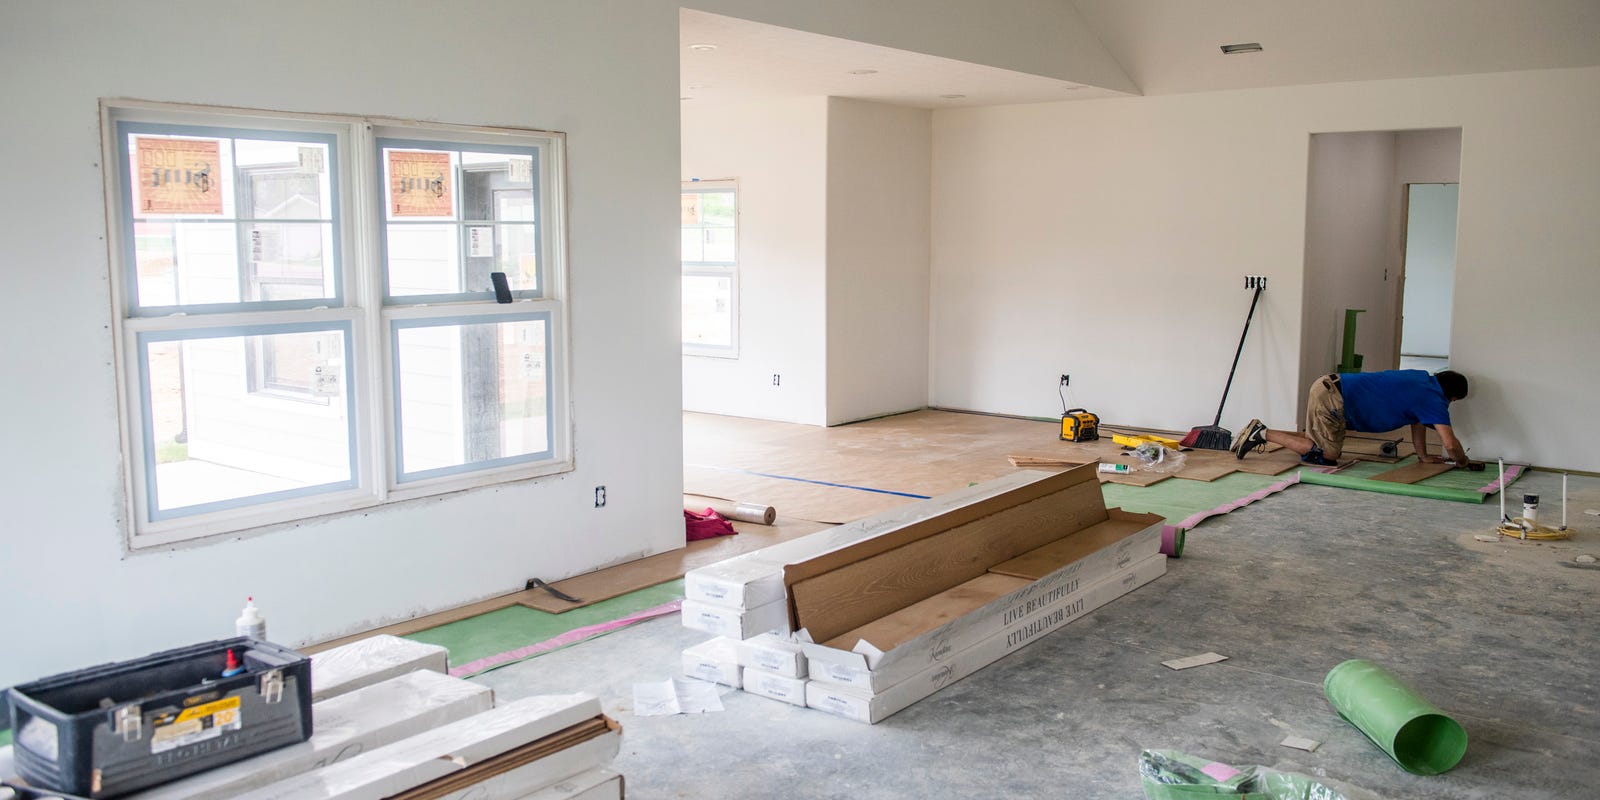 Home construction costs rising in Bloomington, Monroe County